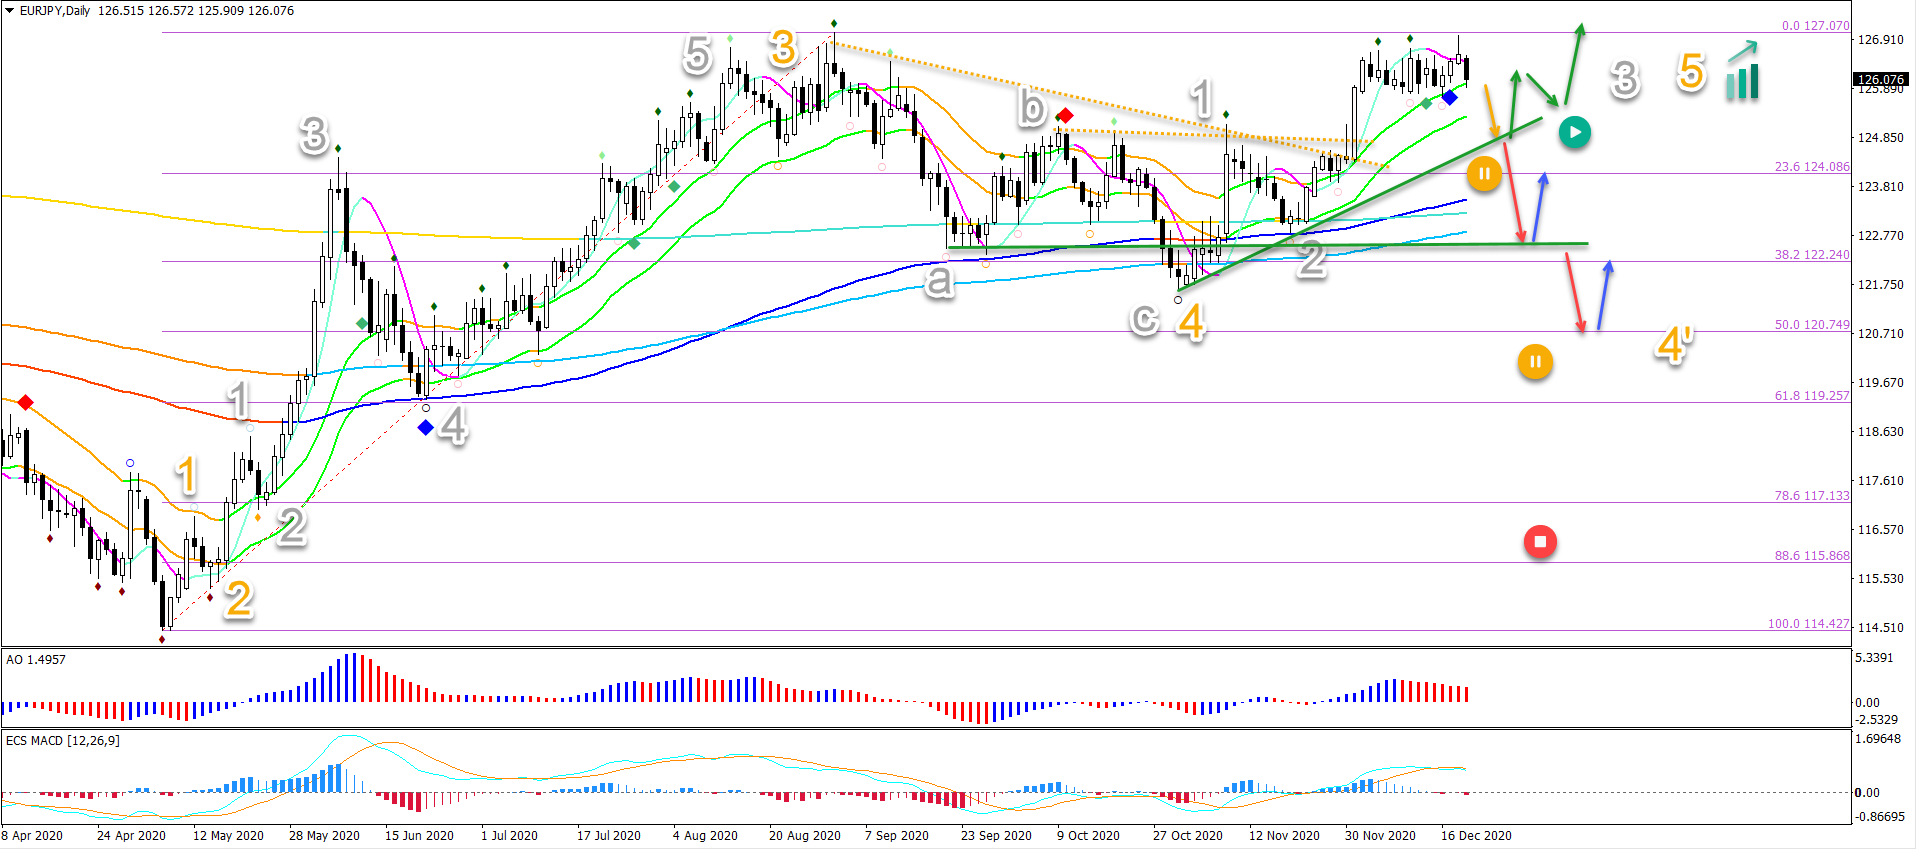 EUR/JPY 21.12.2020 daily chart